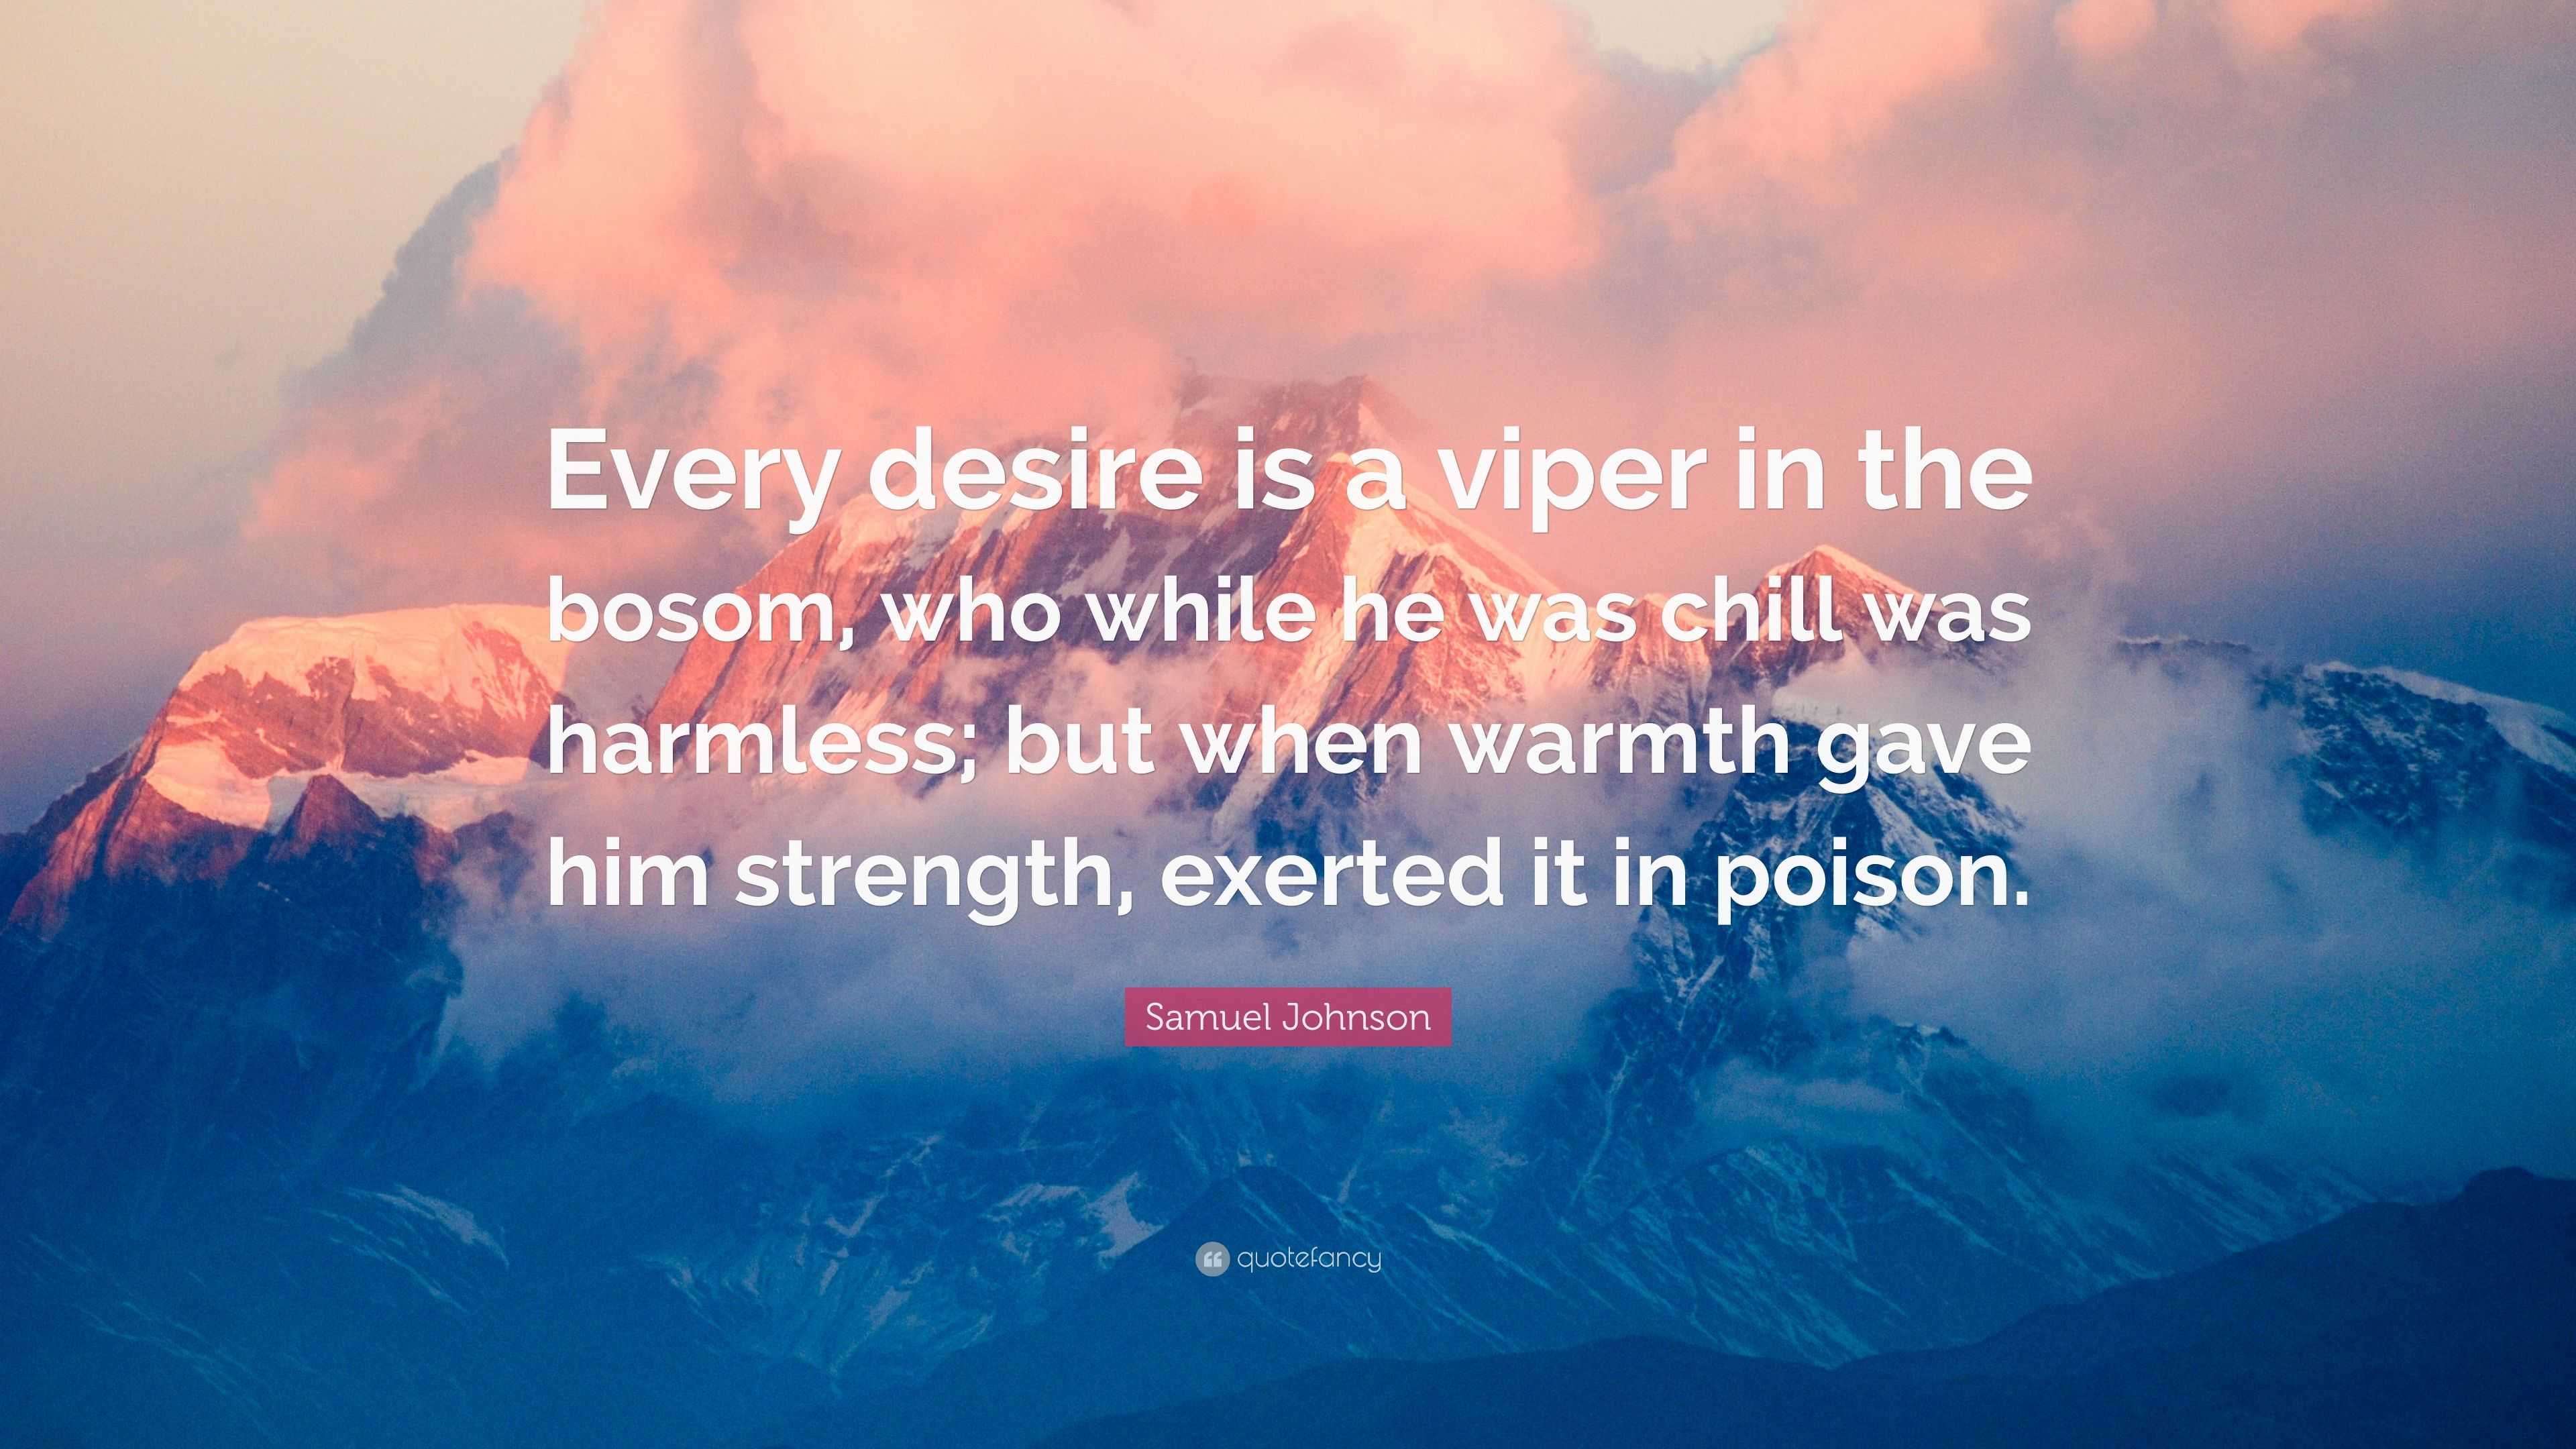 Samuel Johnson Quote: “Every desire is a viper in the bosom, who while he  was chill was harmless; but when warmth gave him strength, exerted it”